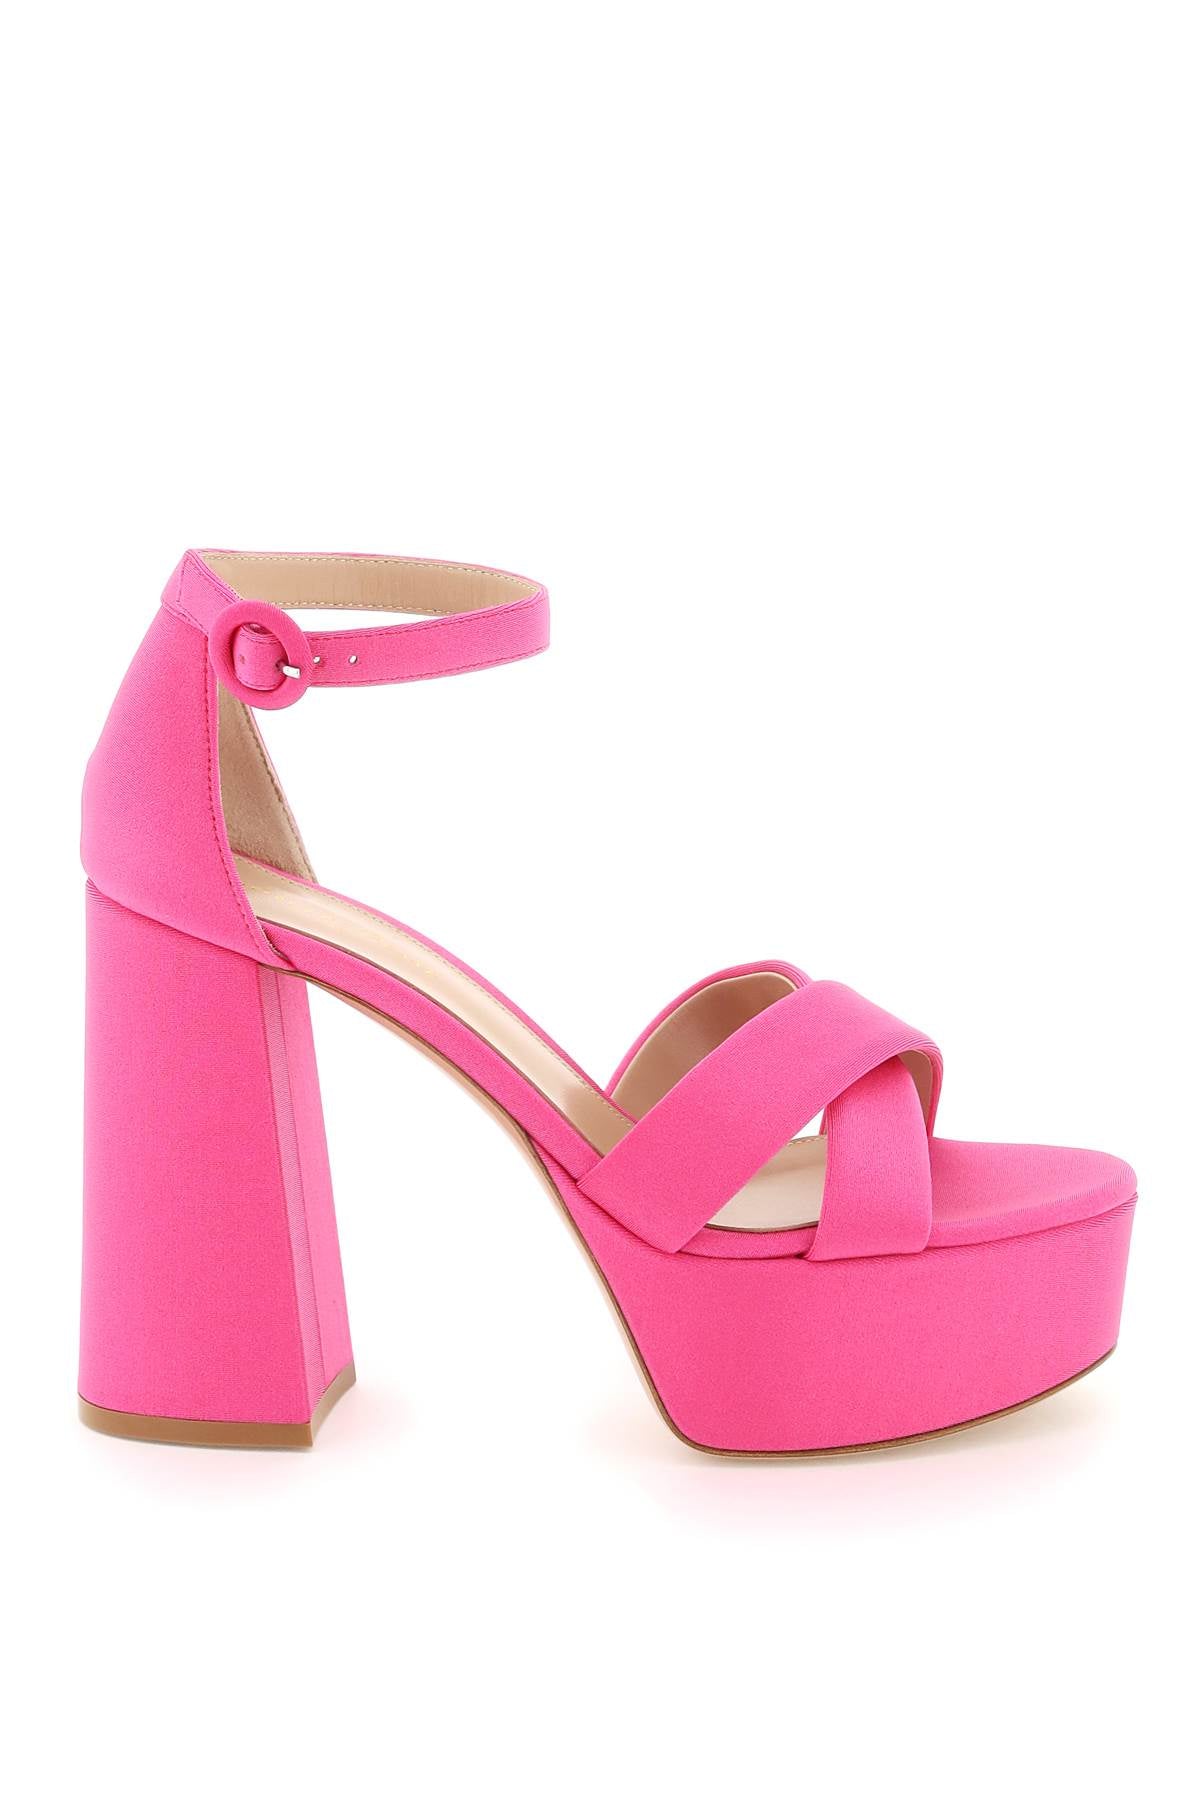 Fuchsia Fabric Sandals with High Heel and Adjustable Ankle Strap